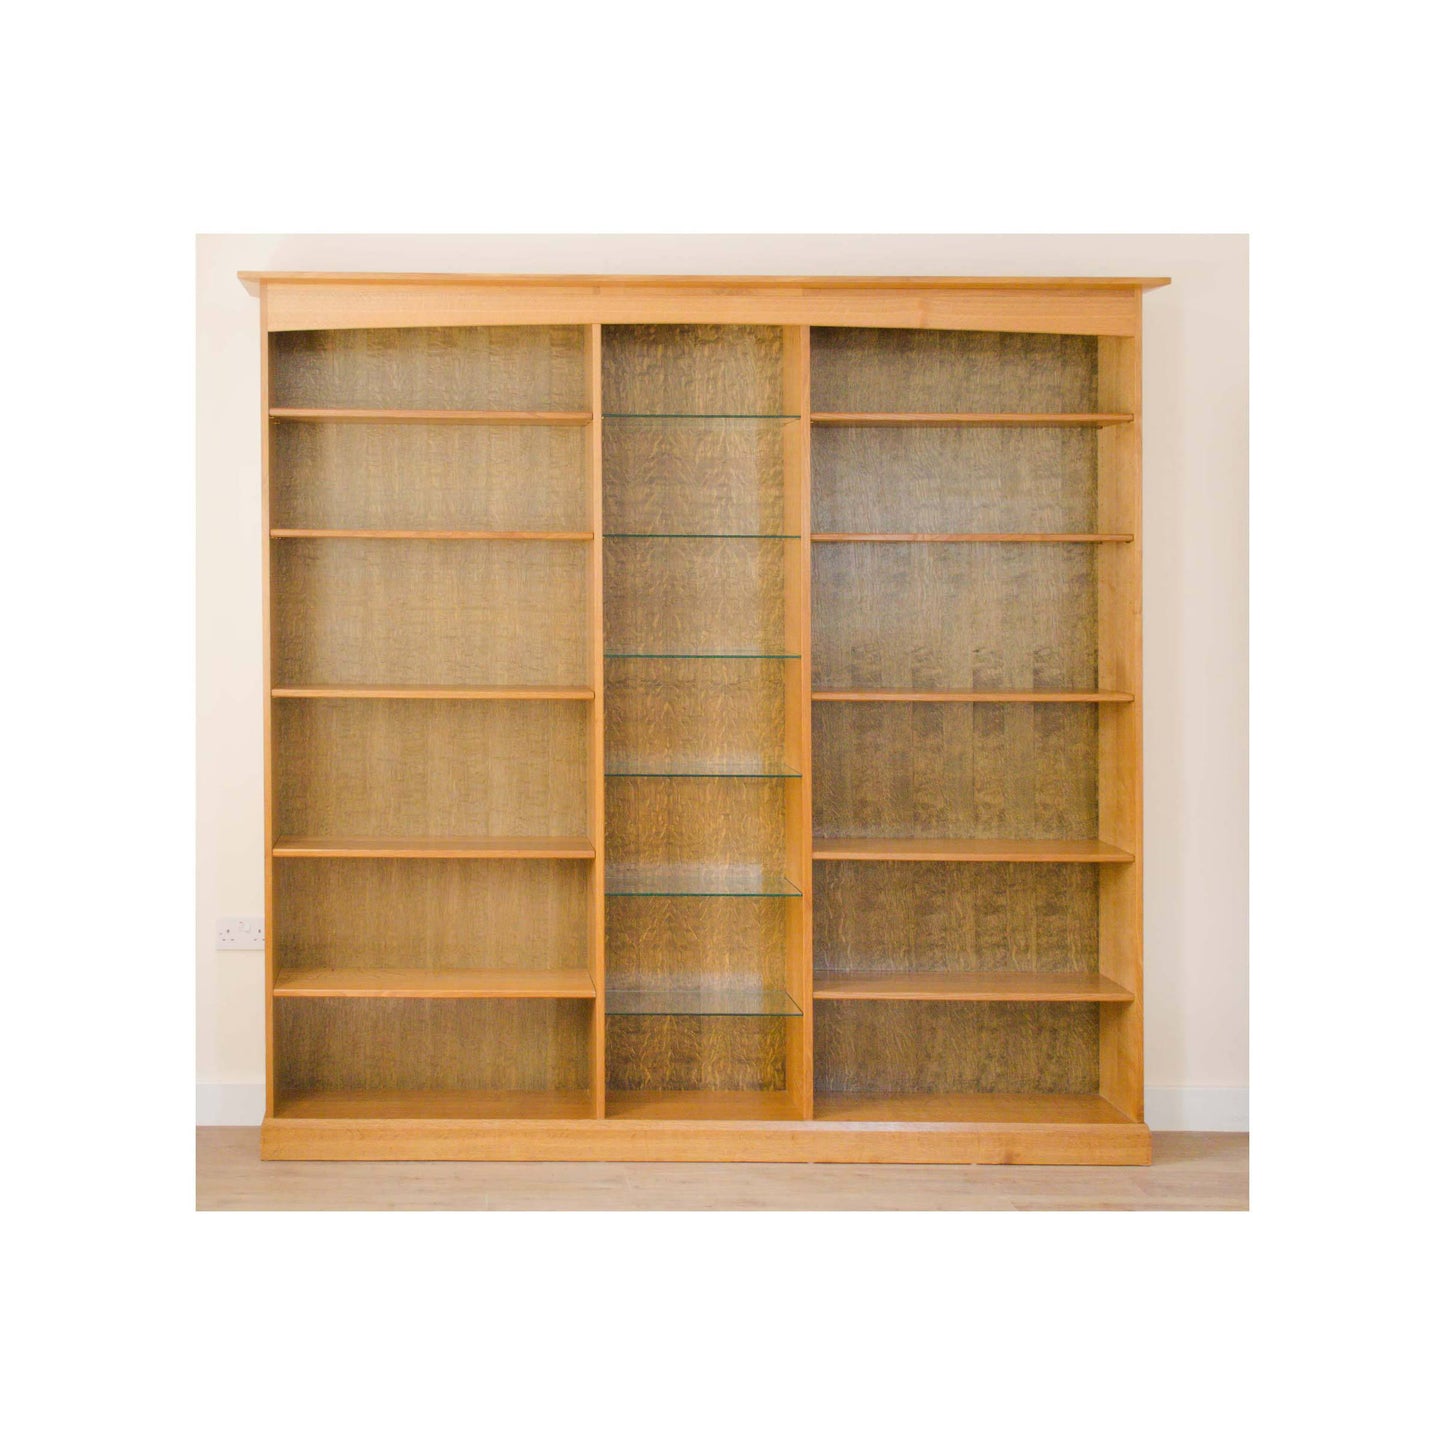 Peter Hall Peter Hall Arts and Crafts Handmade Contemporary Oak Bookcase